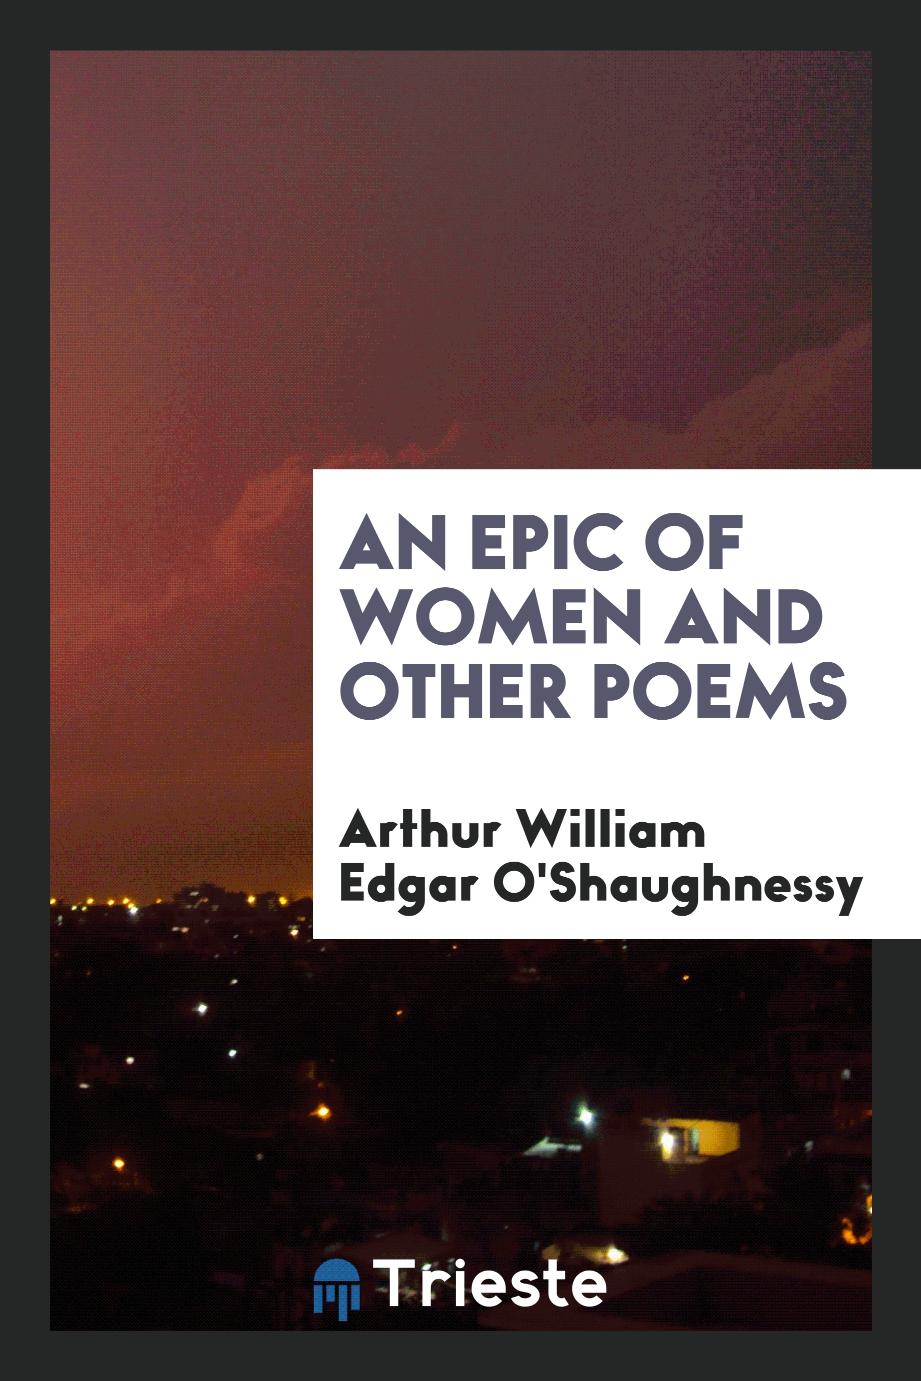 An epic of women and other poems